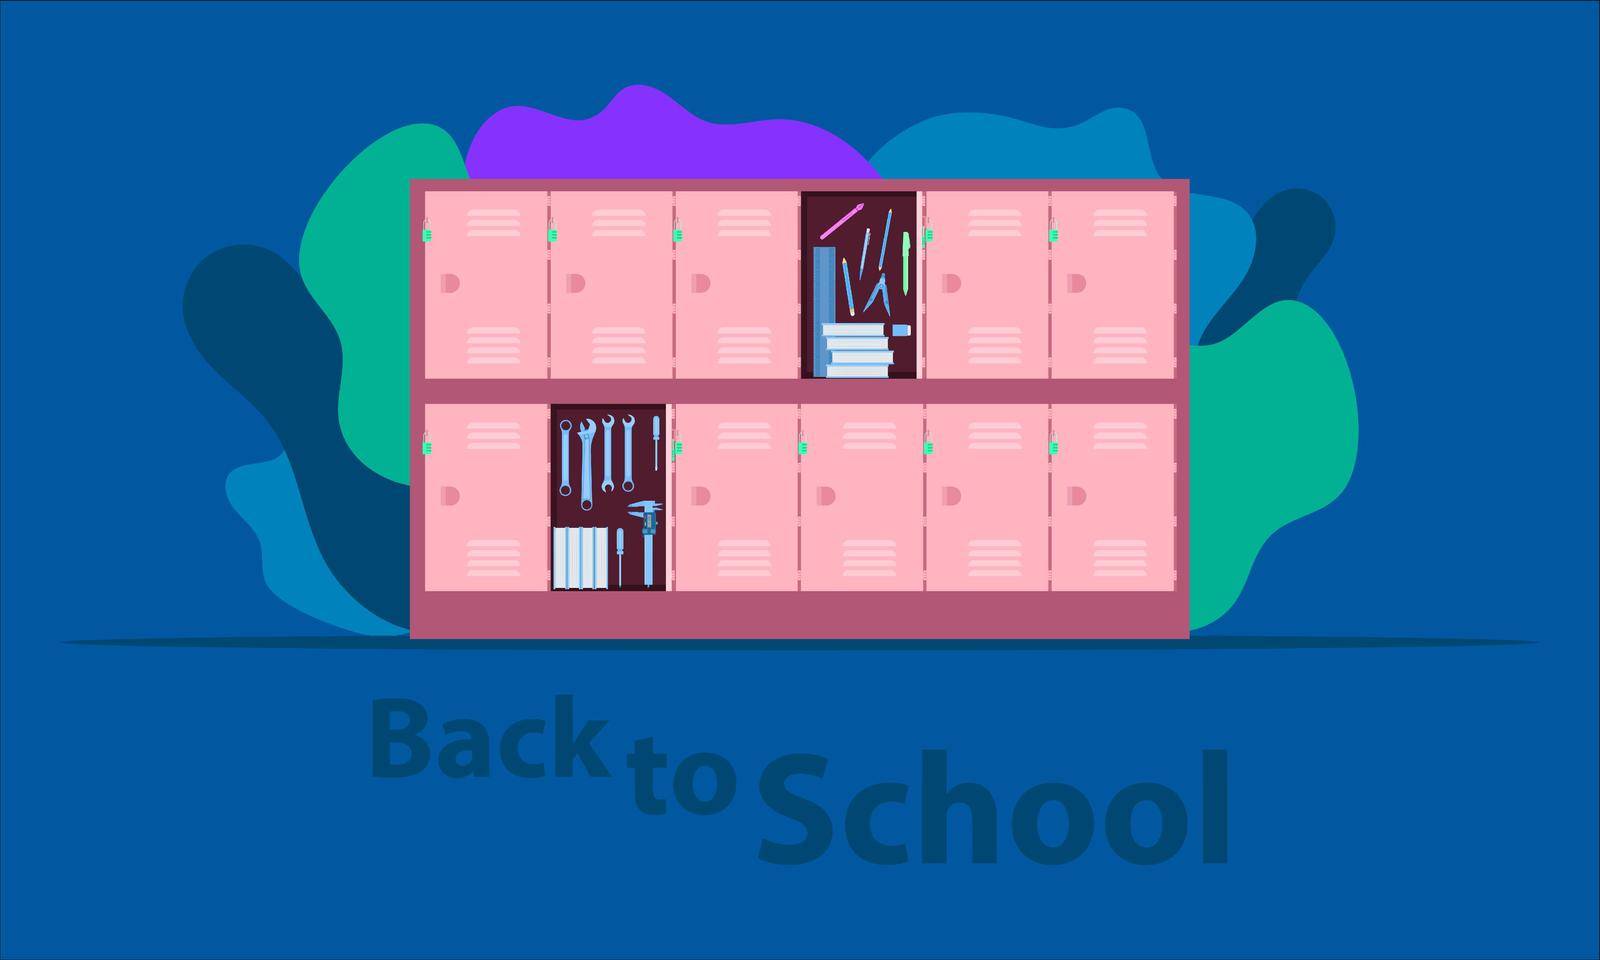 back to school. the hero locker. the helper your chilren's load.  time to funny happy with friends. vector illustration eps10 by Kmaunta